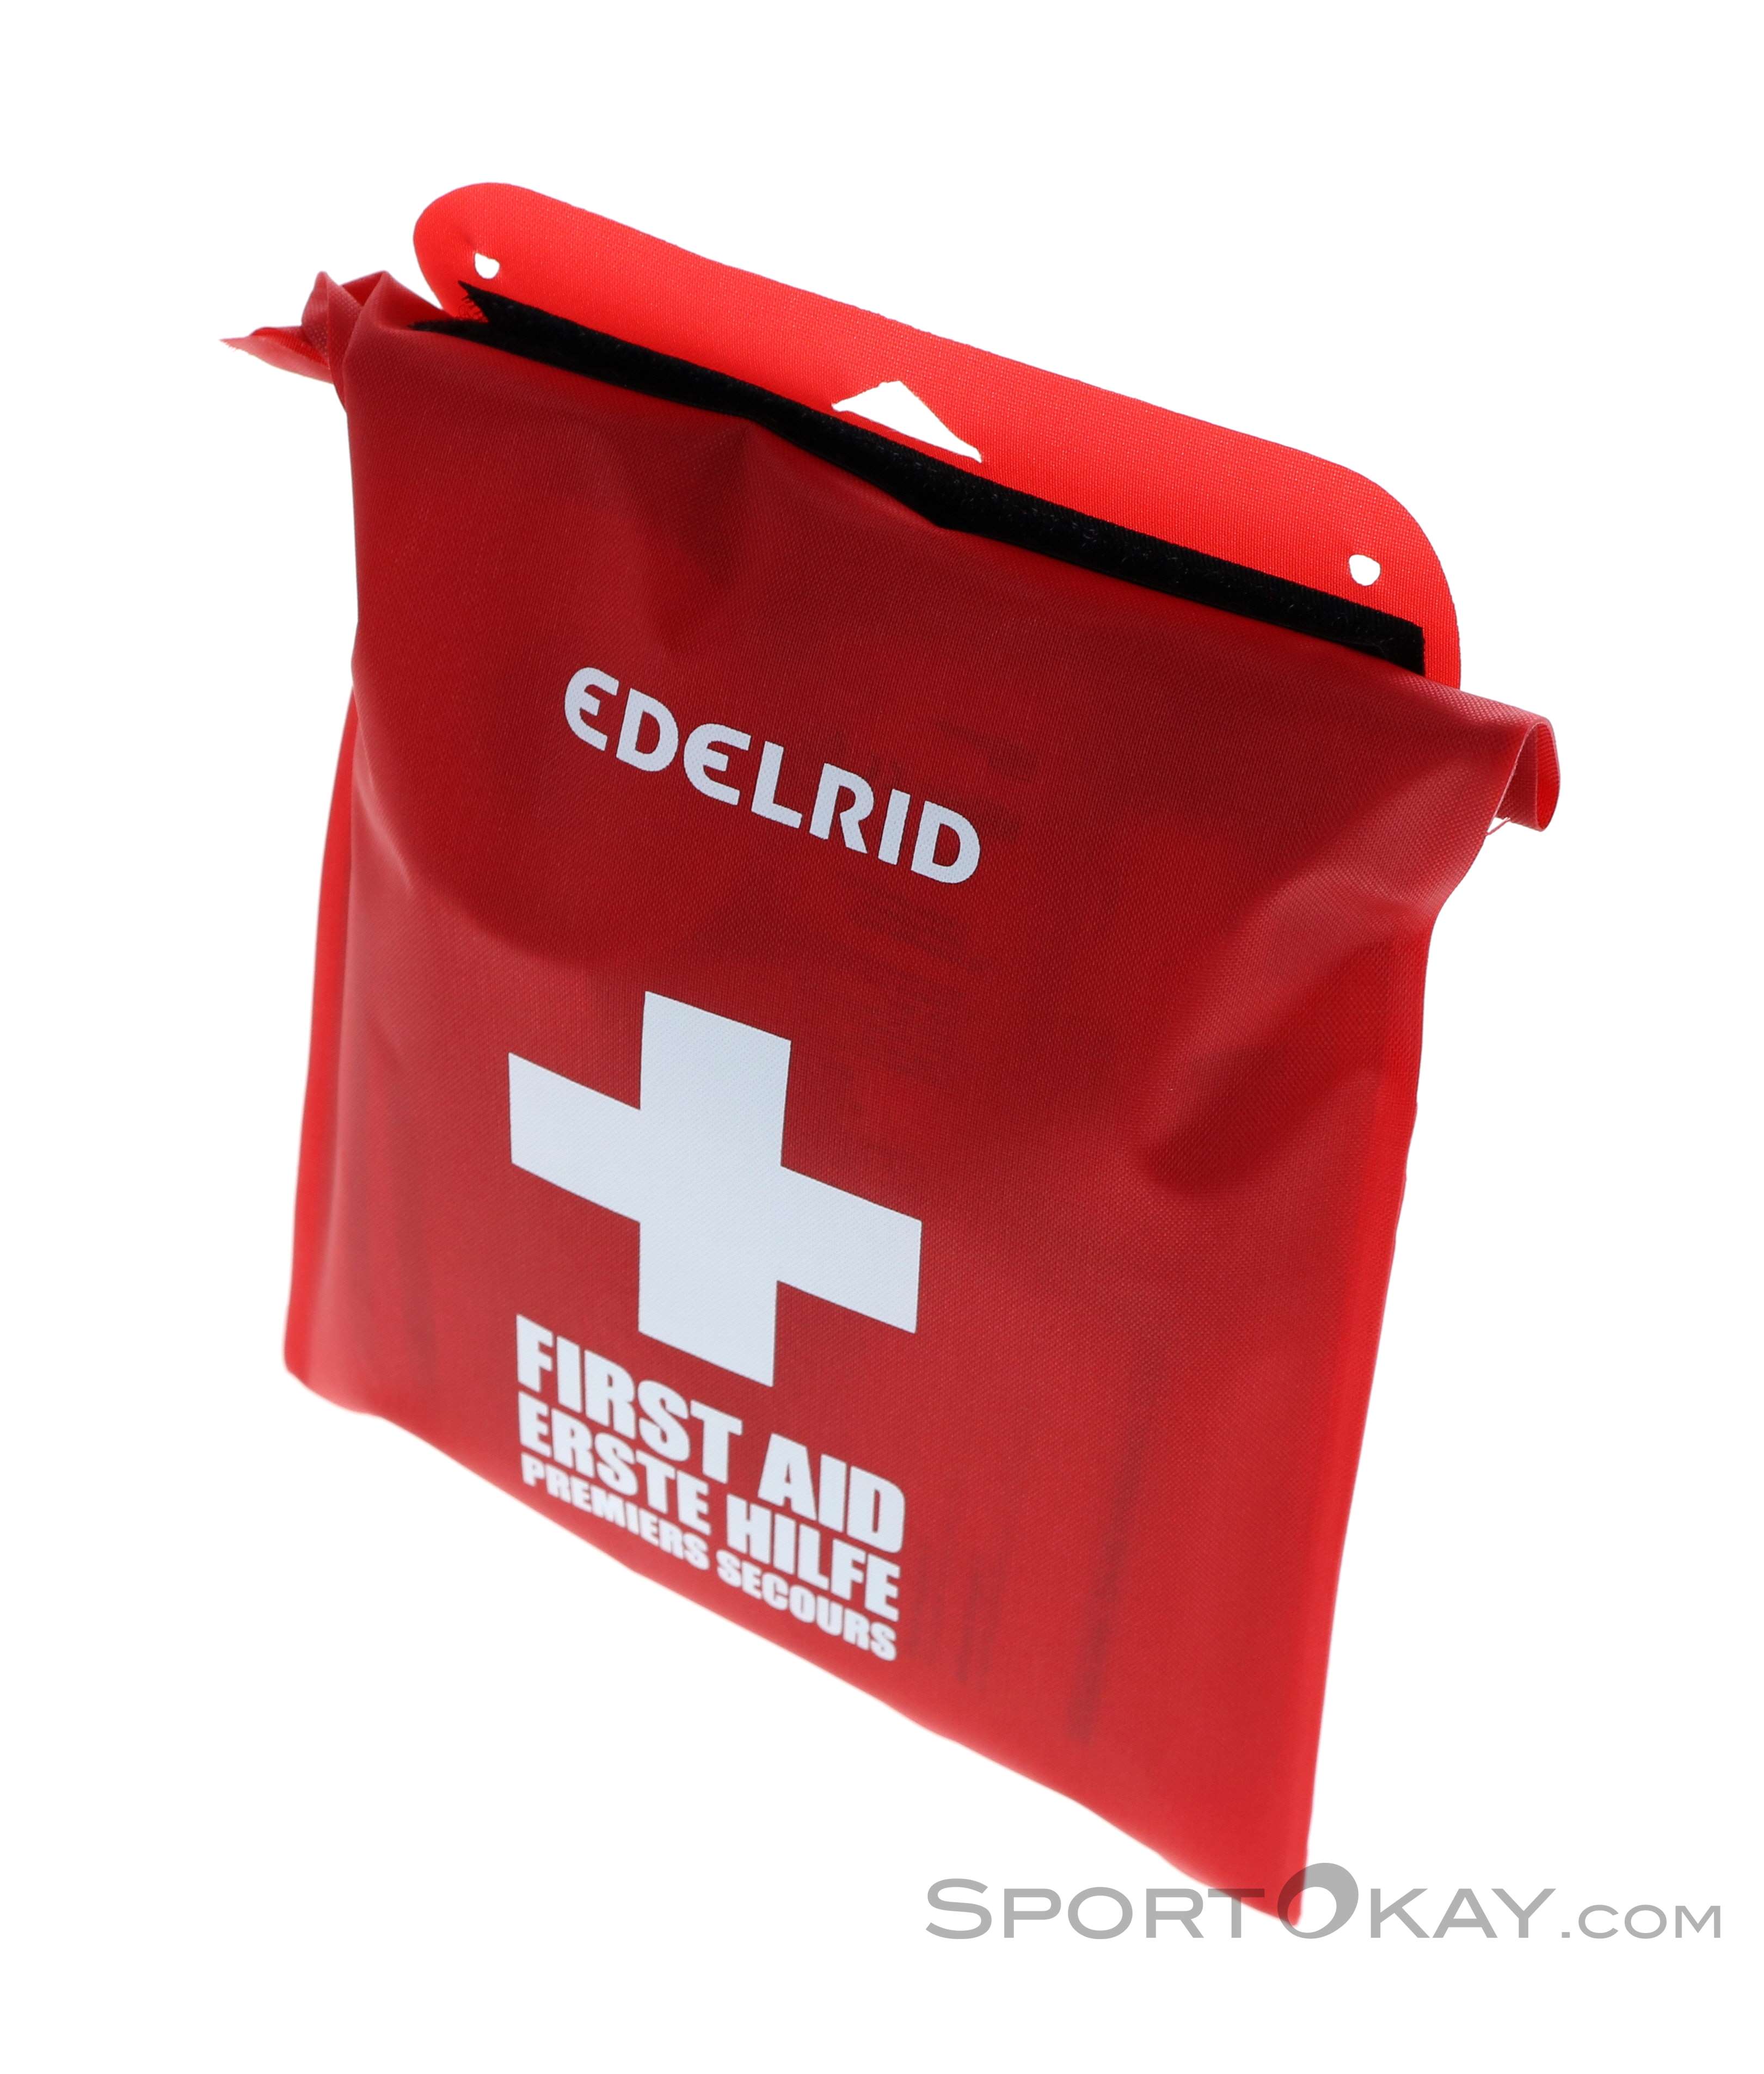 Edelrid First Aid Kit Waterproof First Aid Kit - First Aid Kits